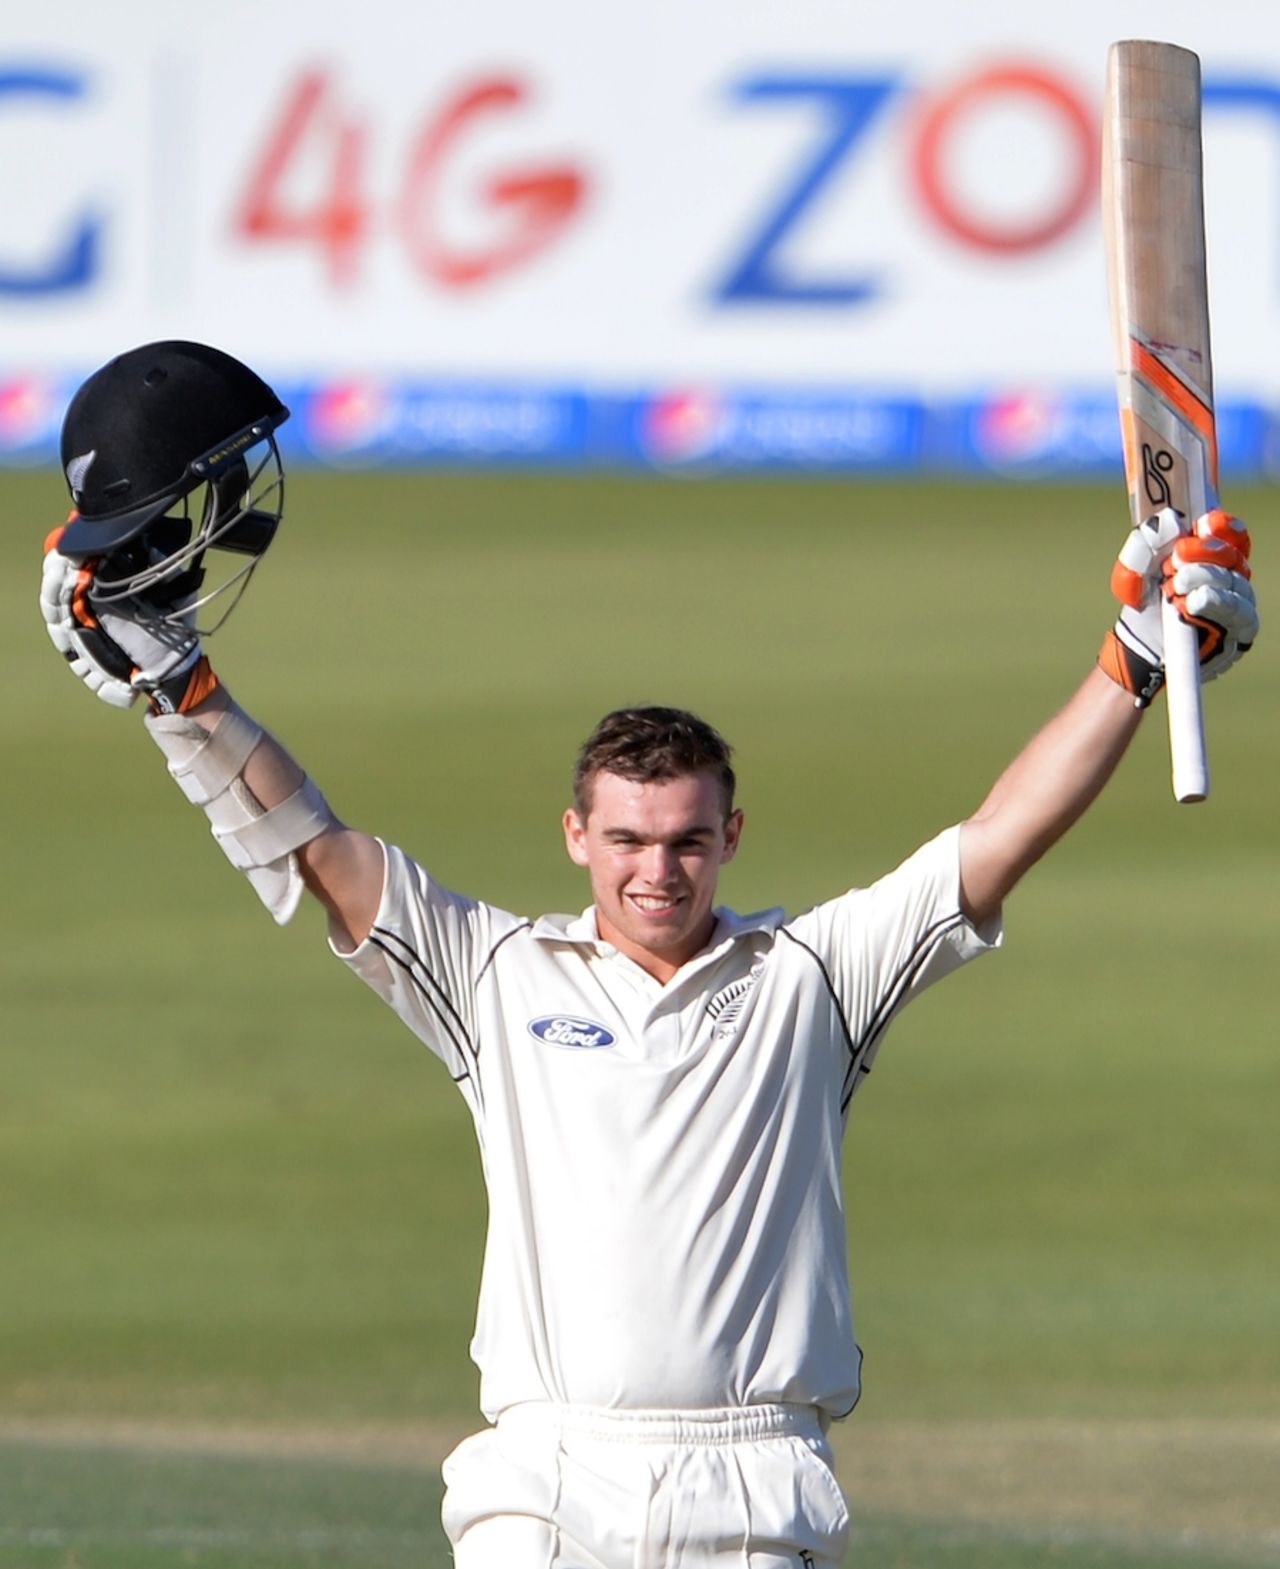 Tom Latham pulls one of the spinners, Pakistan v New Zealand, 1st Test, Abu Dhabi, 3rd day, November 11, 2014